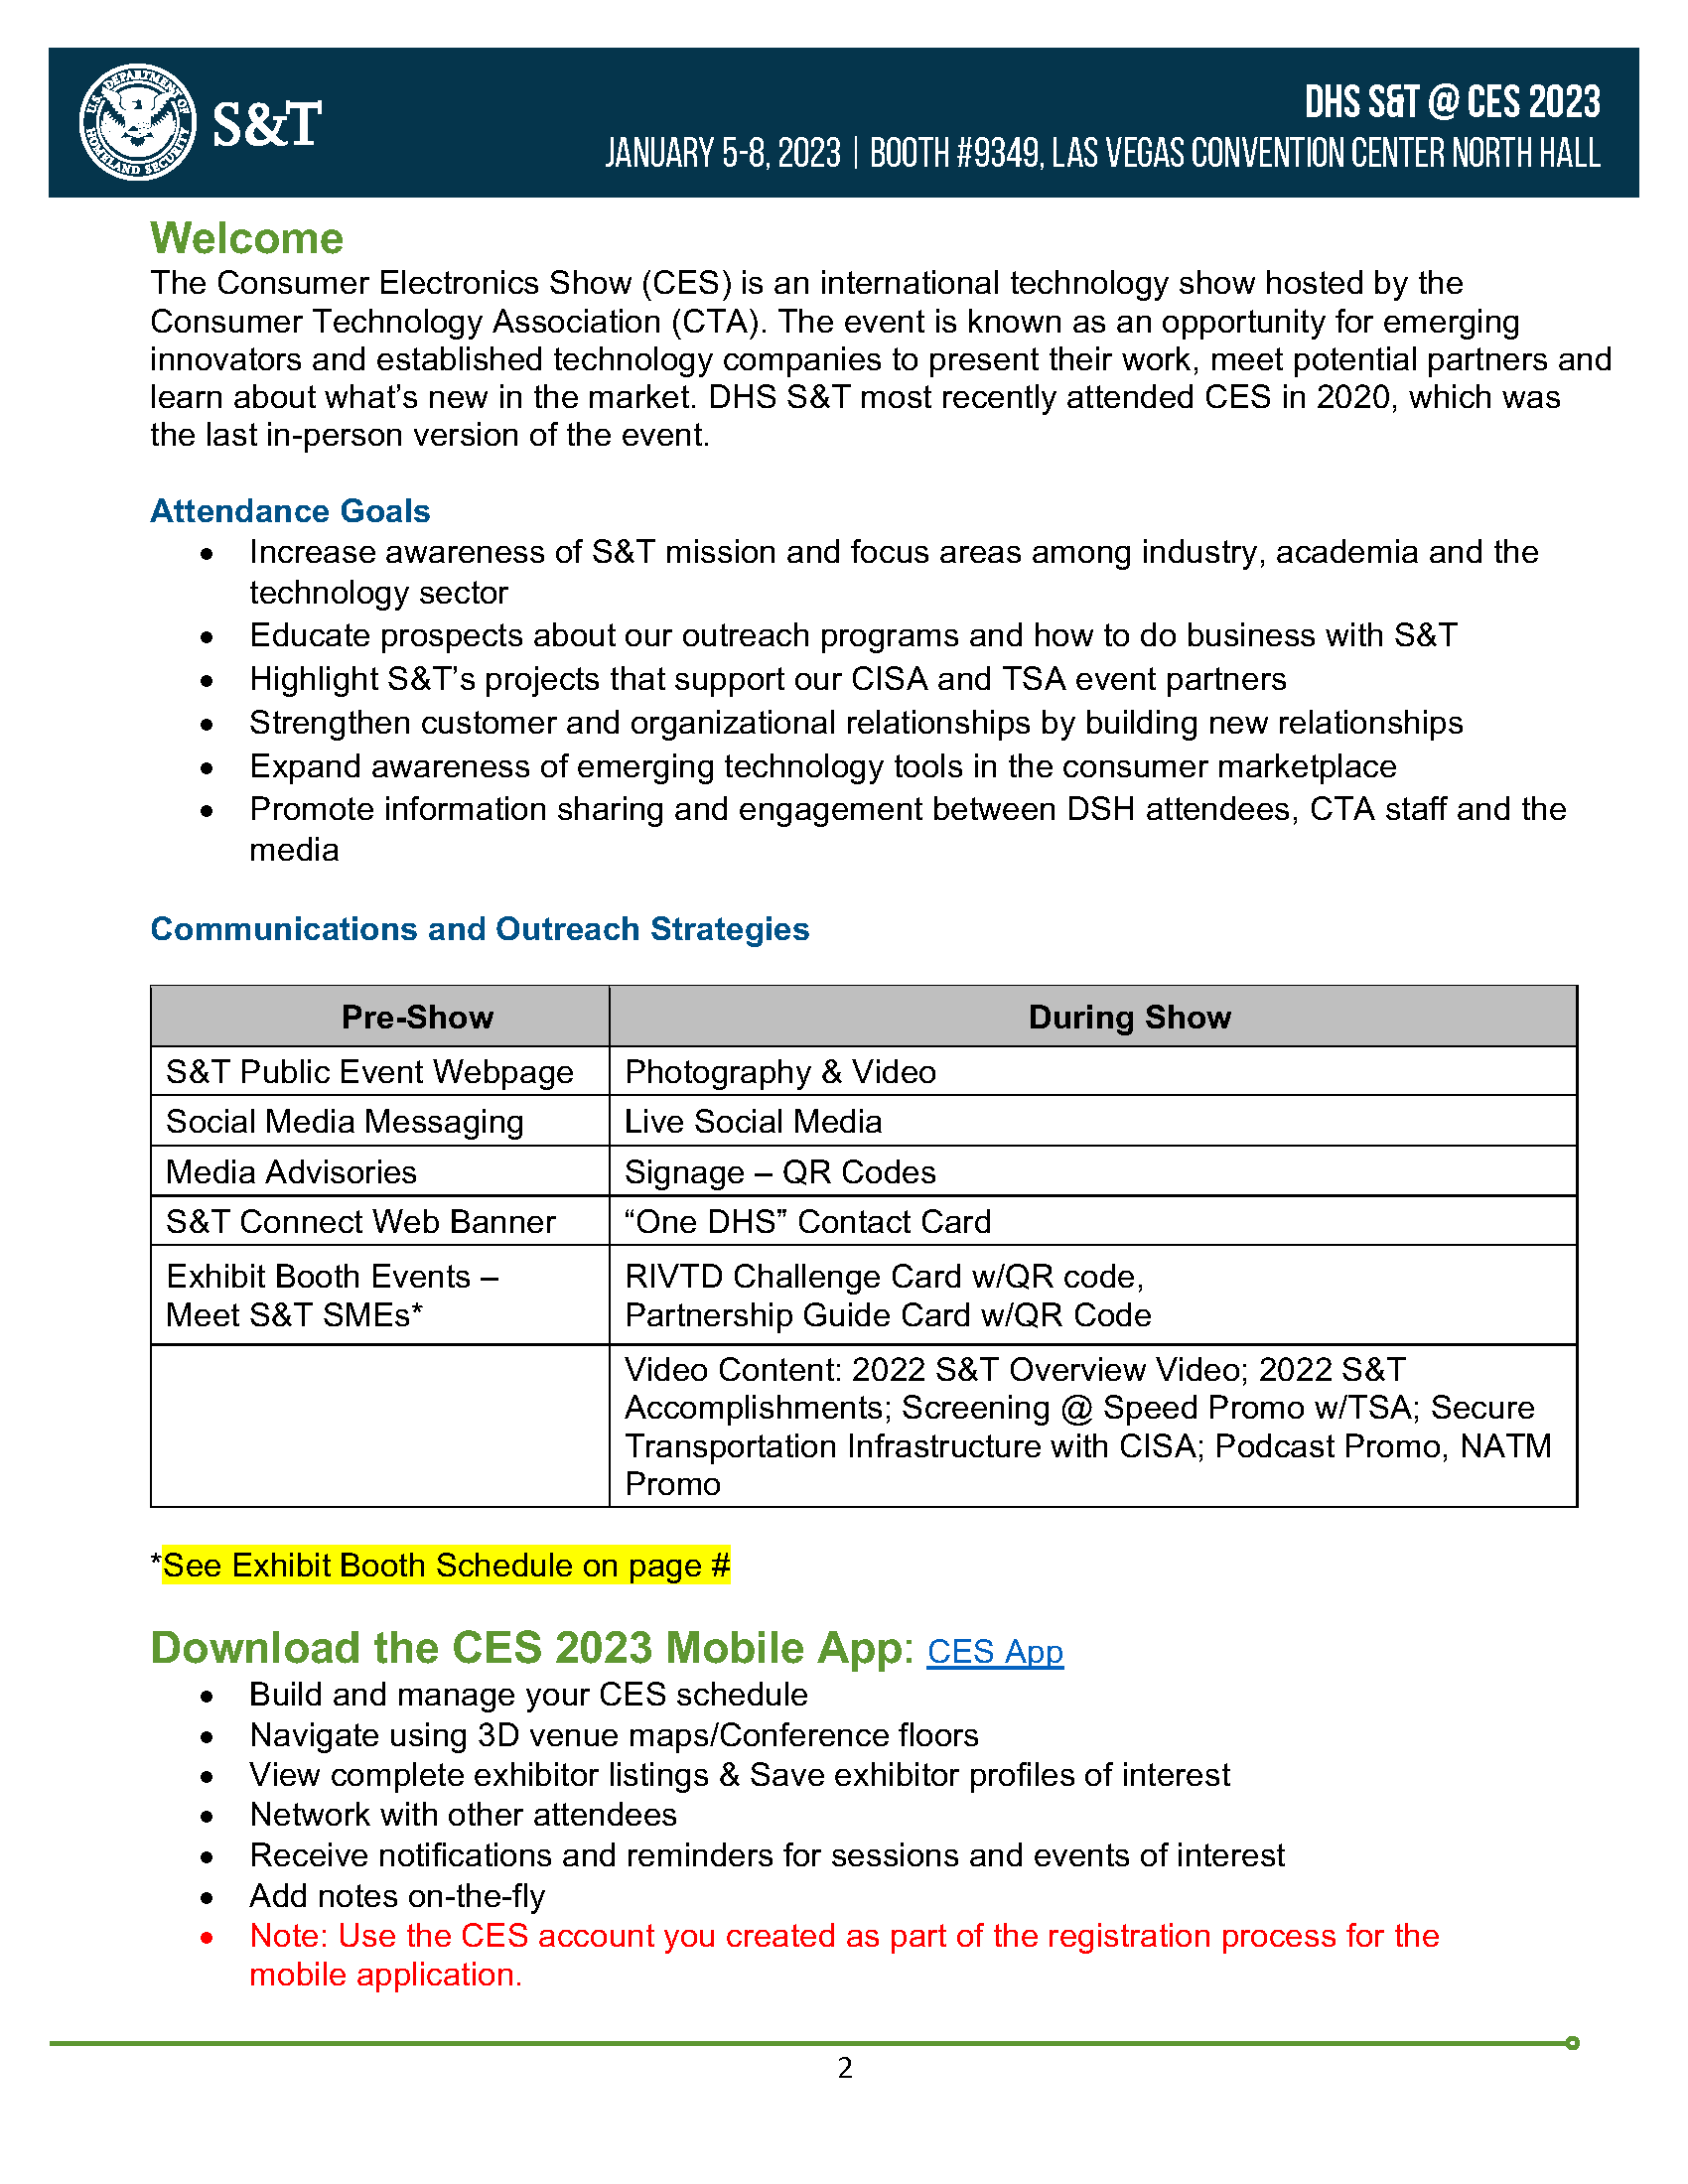 CES Readahead Document_Page_02.png